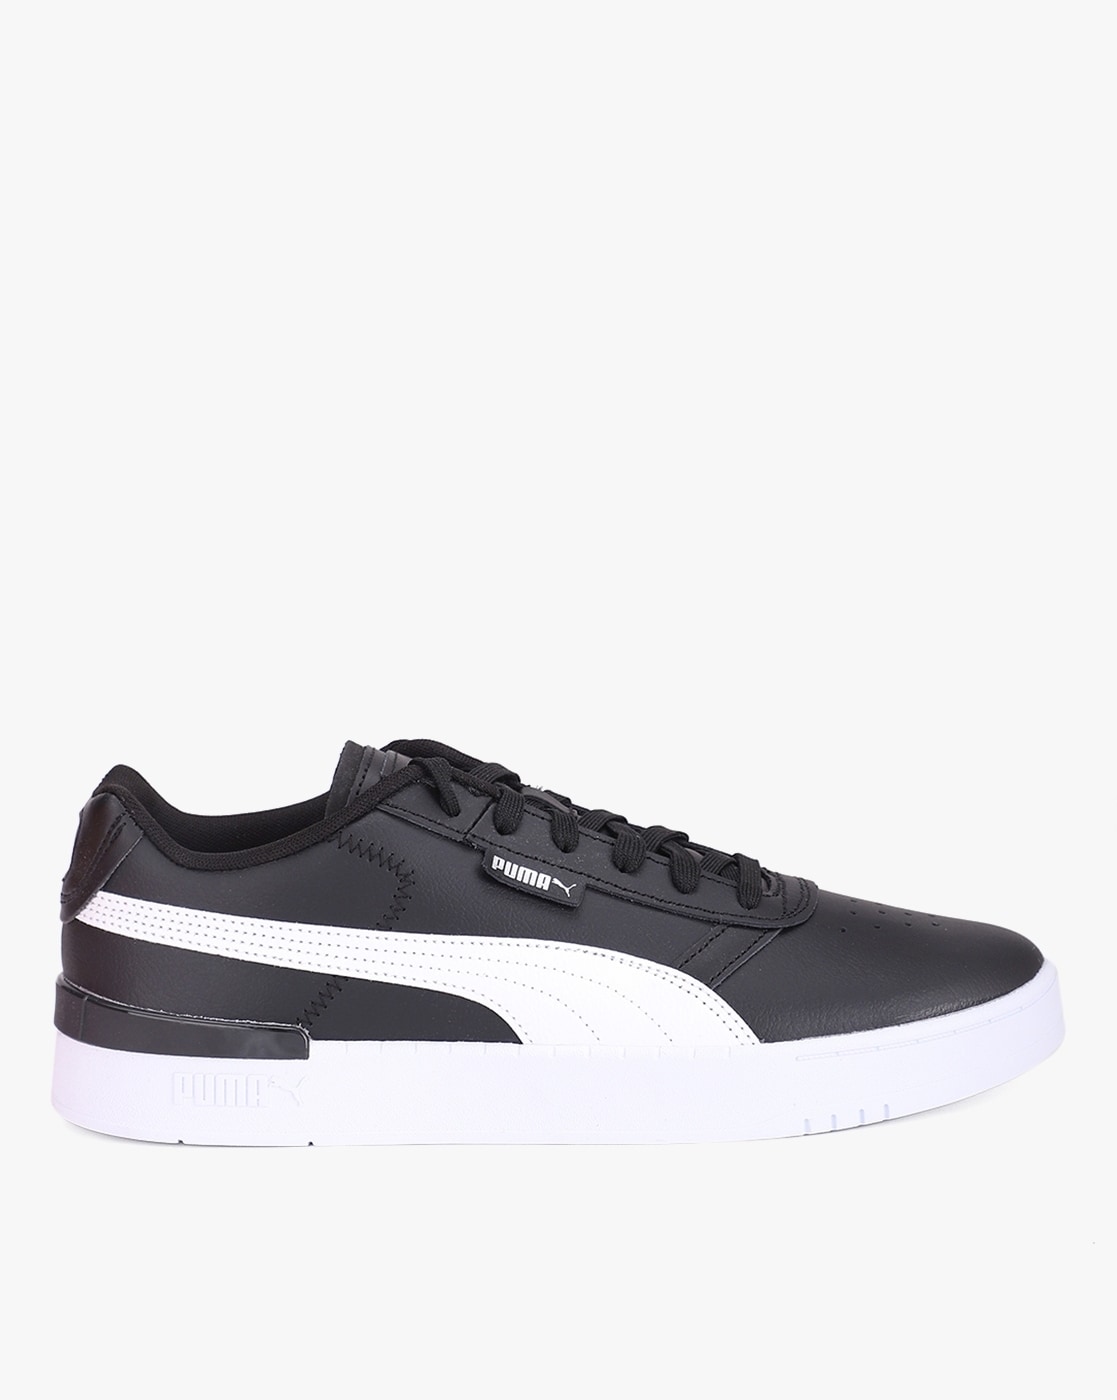 Buy Best Sneakers For Men in India at Best Prices - Solethreads